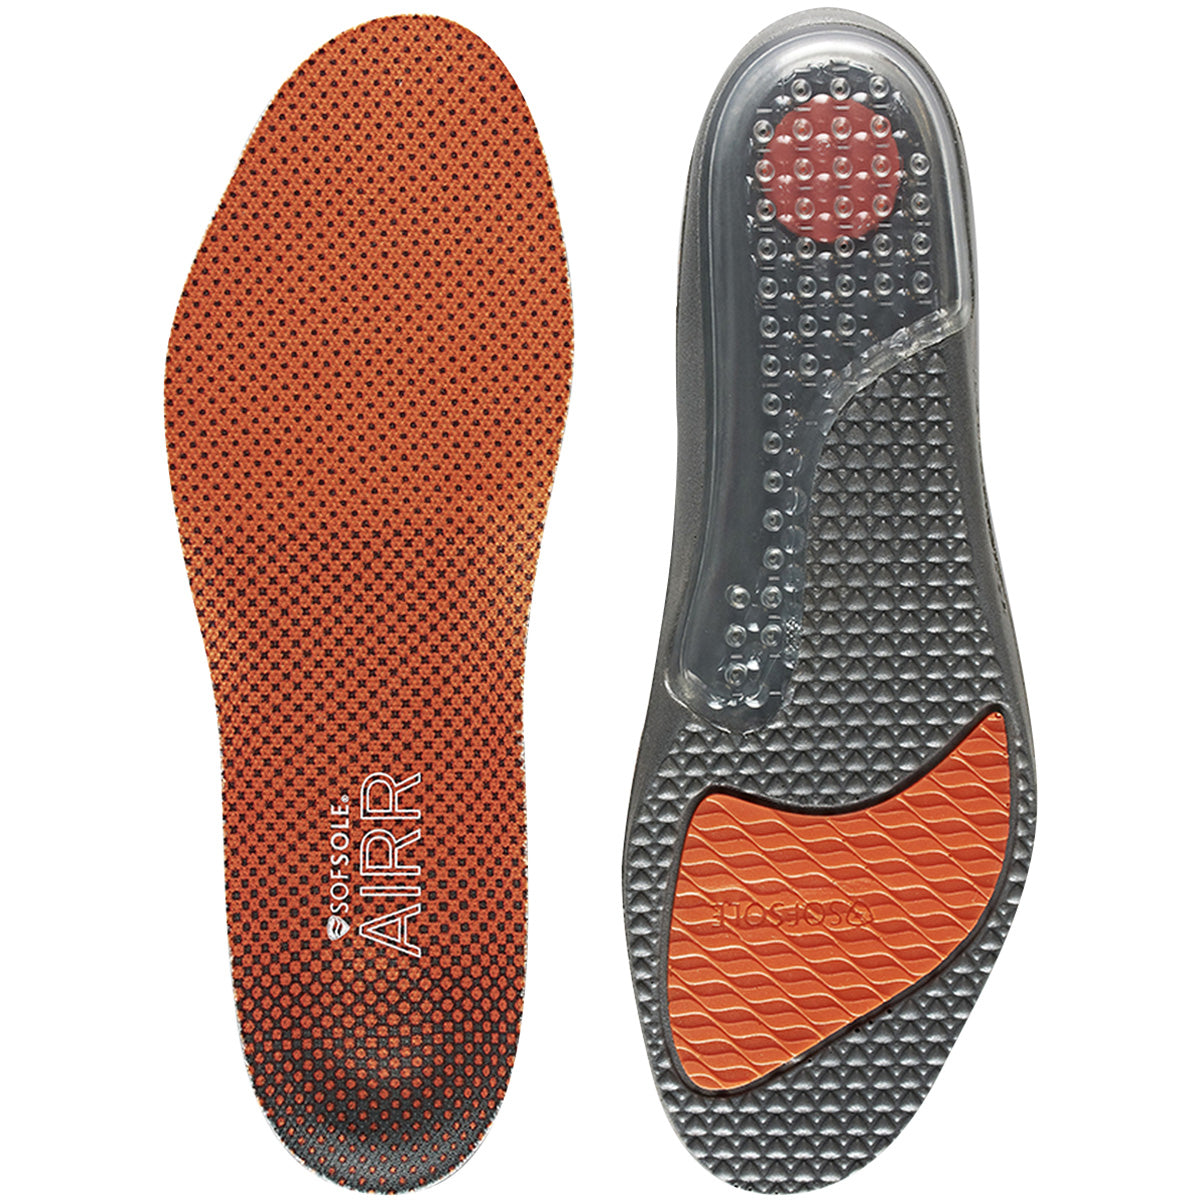 Sof Sole Airr Performance Cushion Full Length Shoe Insoles SofSole